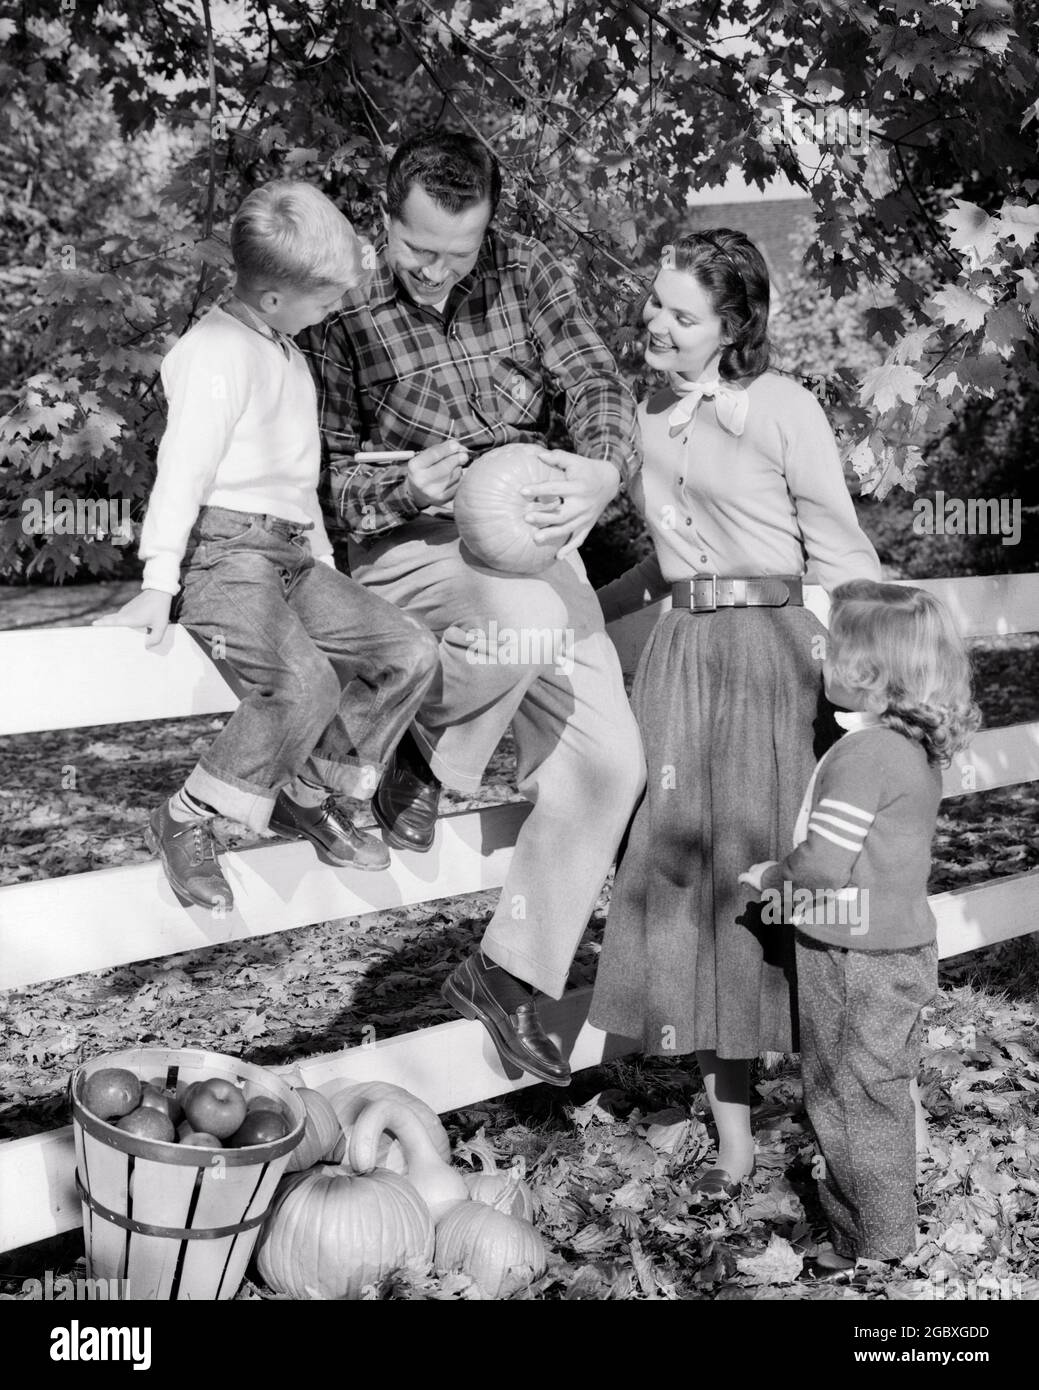 1950s FAMILY OF FOUR IN AUTUMN MOTHER DAUGHTER STANDING BY SON SITTING ON WHITE FENCE WATCHING FATHER CARVING HALLOWEEN PUMPKIN  - h819 HAR001 HARS FENCE FOUR AUTUMN MOM PUMPKIN NOSTALGIC FALL PAIR 4 SUBURBAN MOTHERS MAGIC OLD TIME BUSY NOSTALGIA OLD FASHION 1 JUVENILE BALANCE TEAMWORK CARVING SONS FAMILIES JOY LIFESTYLE CELEBRATION FEMALES MARRIED RURAL SPOUSE HUSBANDS HOME LIFE COPY SPACE FULL-LENGTH LADIES DAUGHTERS PERSONS INSPIRATION CARING MALES CONFIDENCE FATHERS B&W PARTNER GOALS HAPPINESS LEISURE STRENGTH DADS EXCITEMENT RECREATION PRIDE BY IN OF ON AUTHORITY CONNECTION CONCEPTUAL Stock Photo